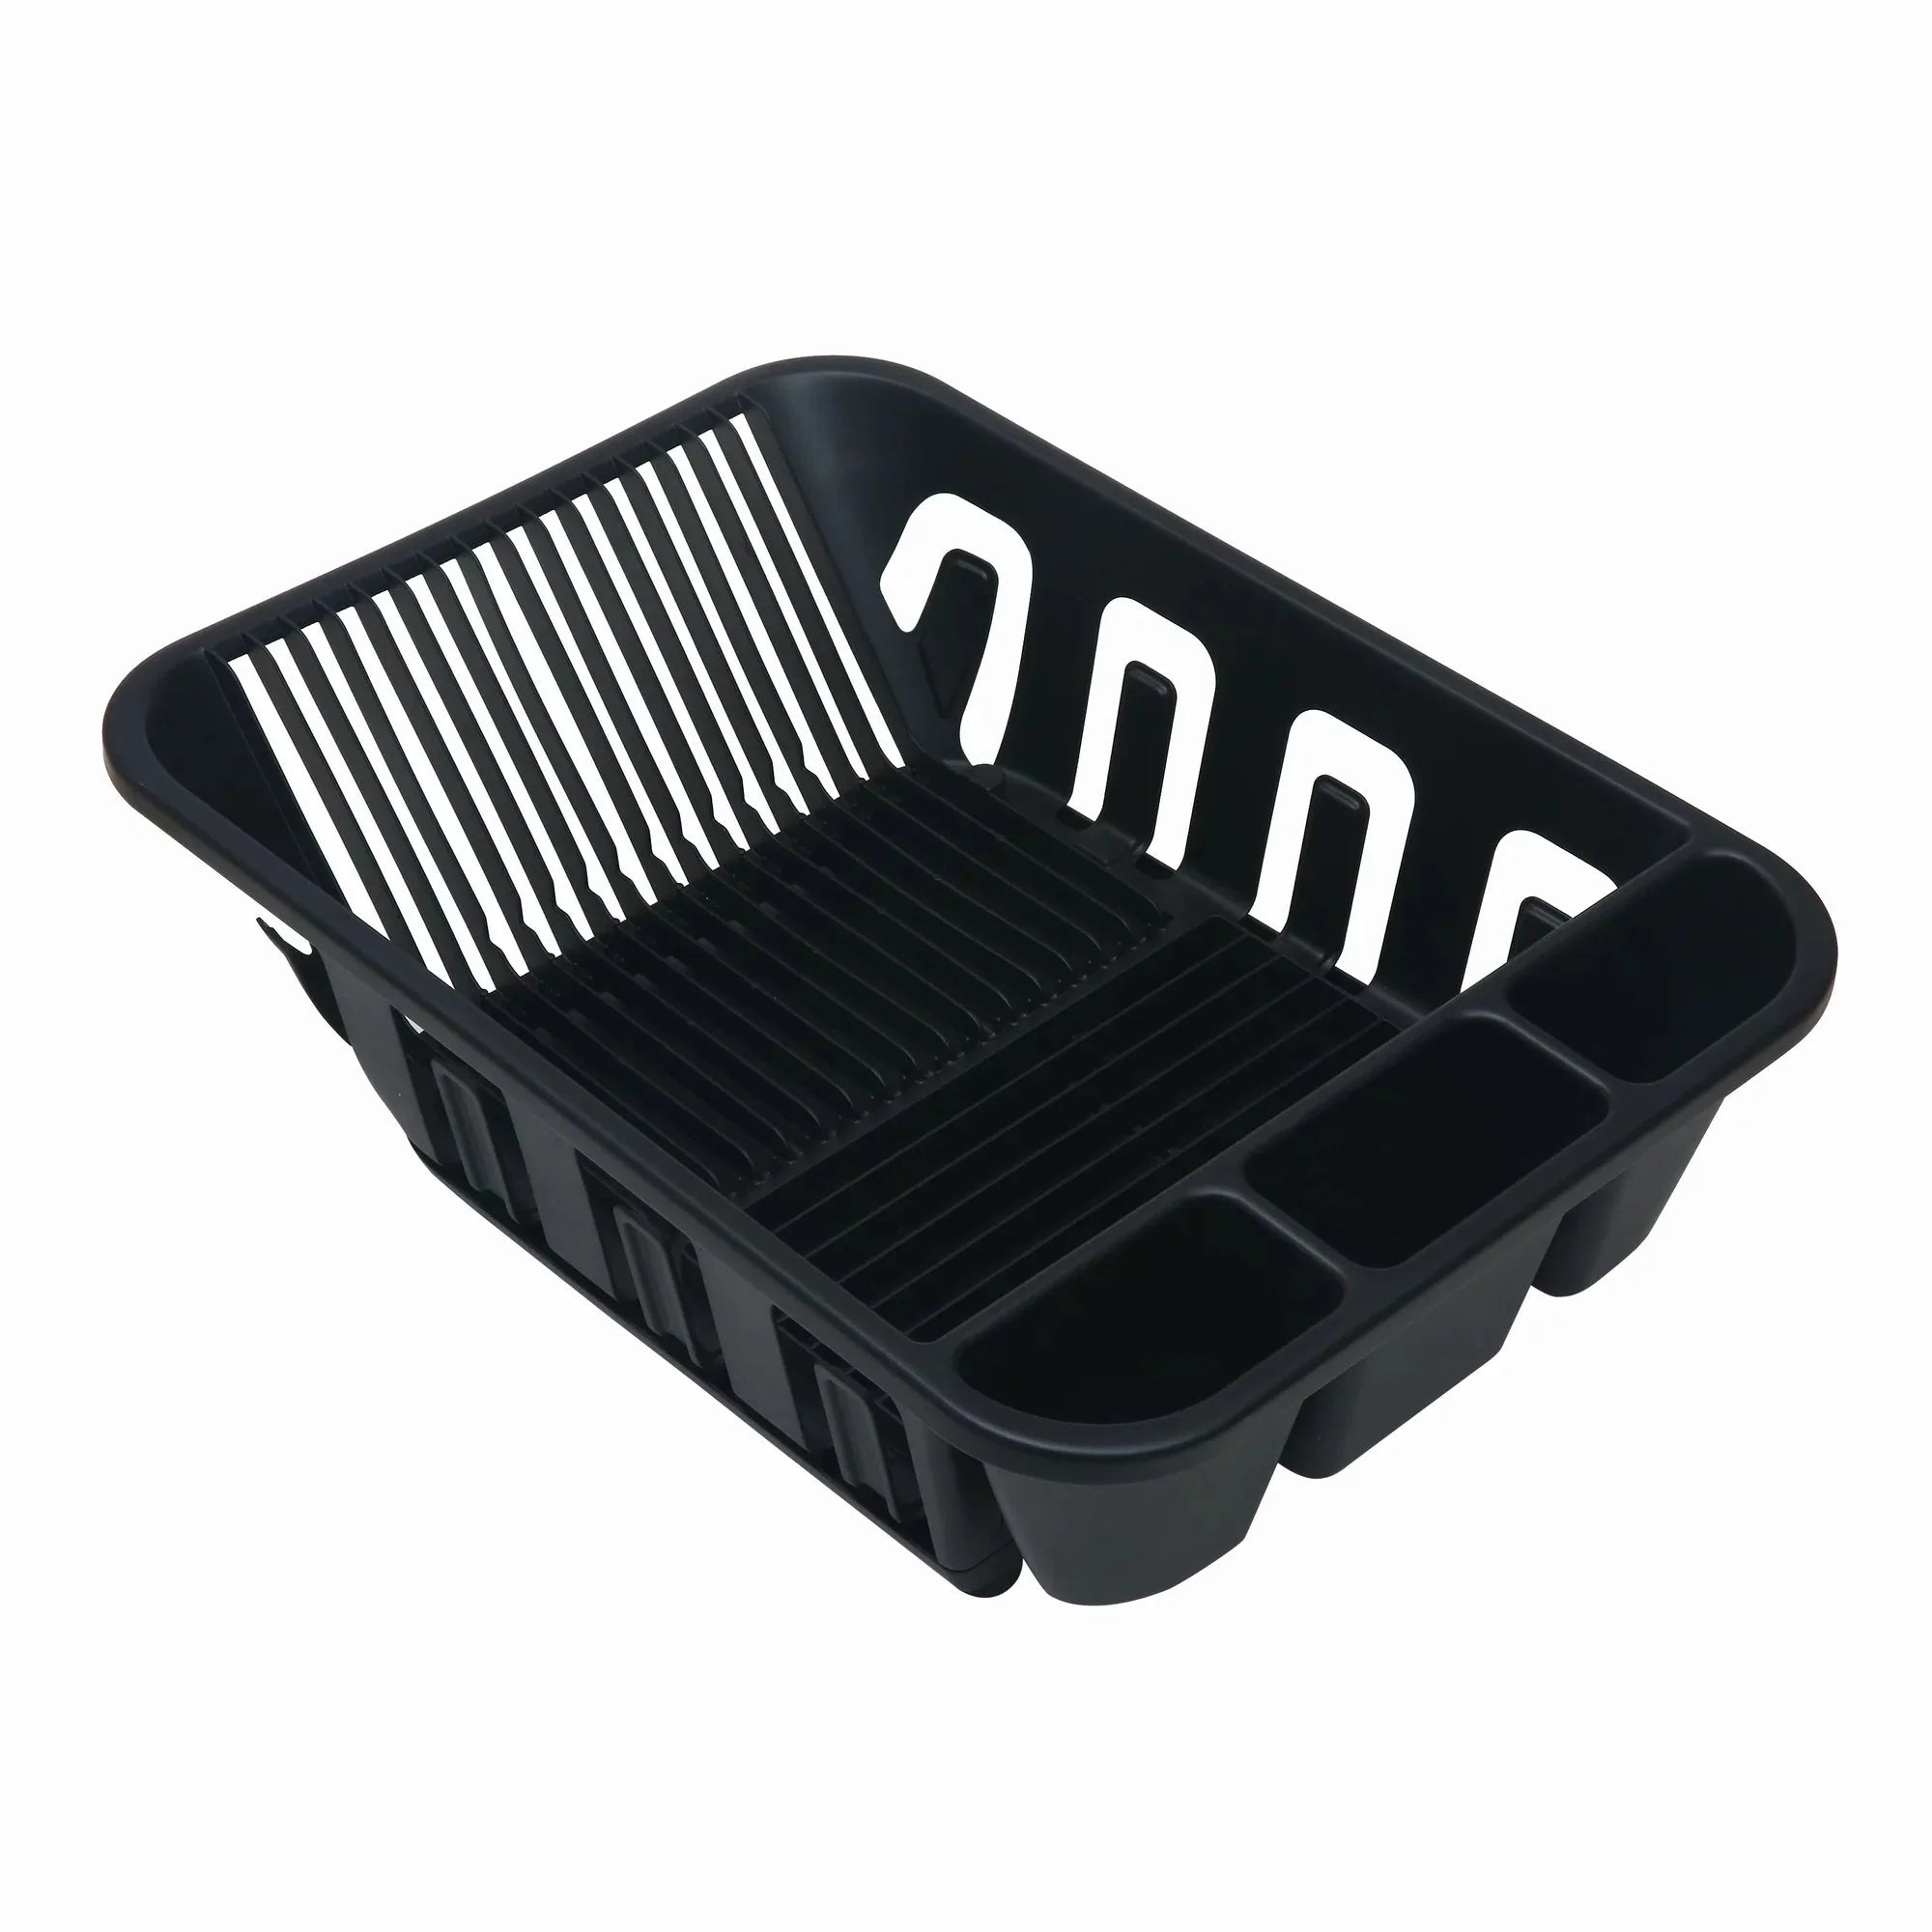 Wholesale prices with free shipping all over United States Mainstays 2-Piece Plastic Kitchen Sink Set, Dish Rack with Slide-out Drip Tray, Black - Steven Deals